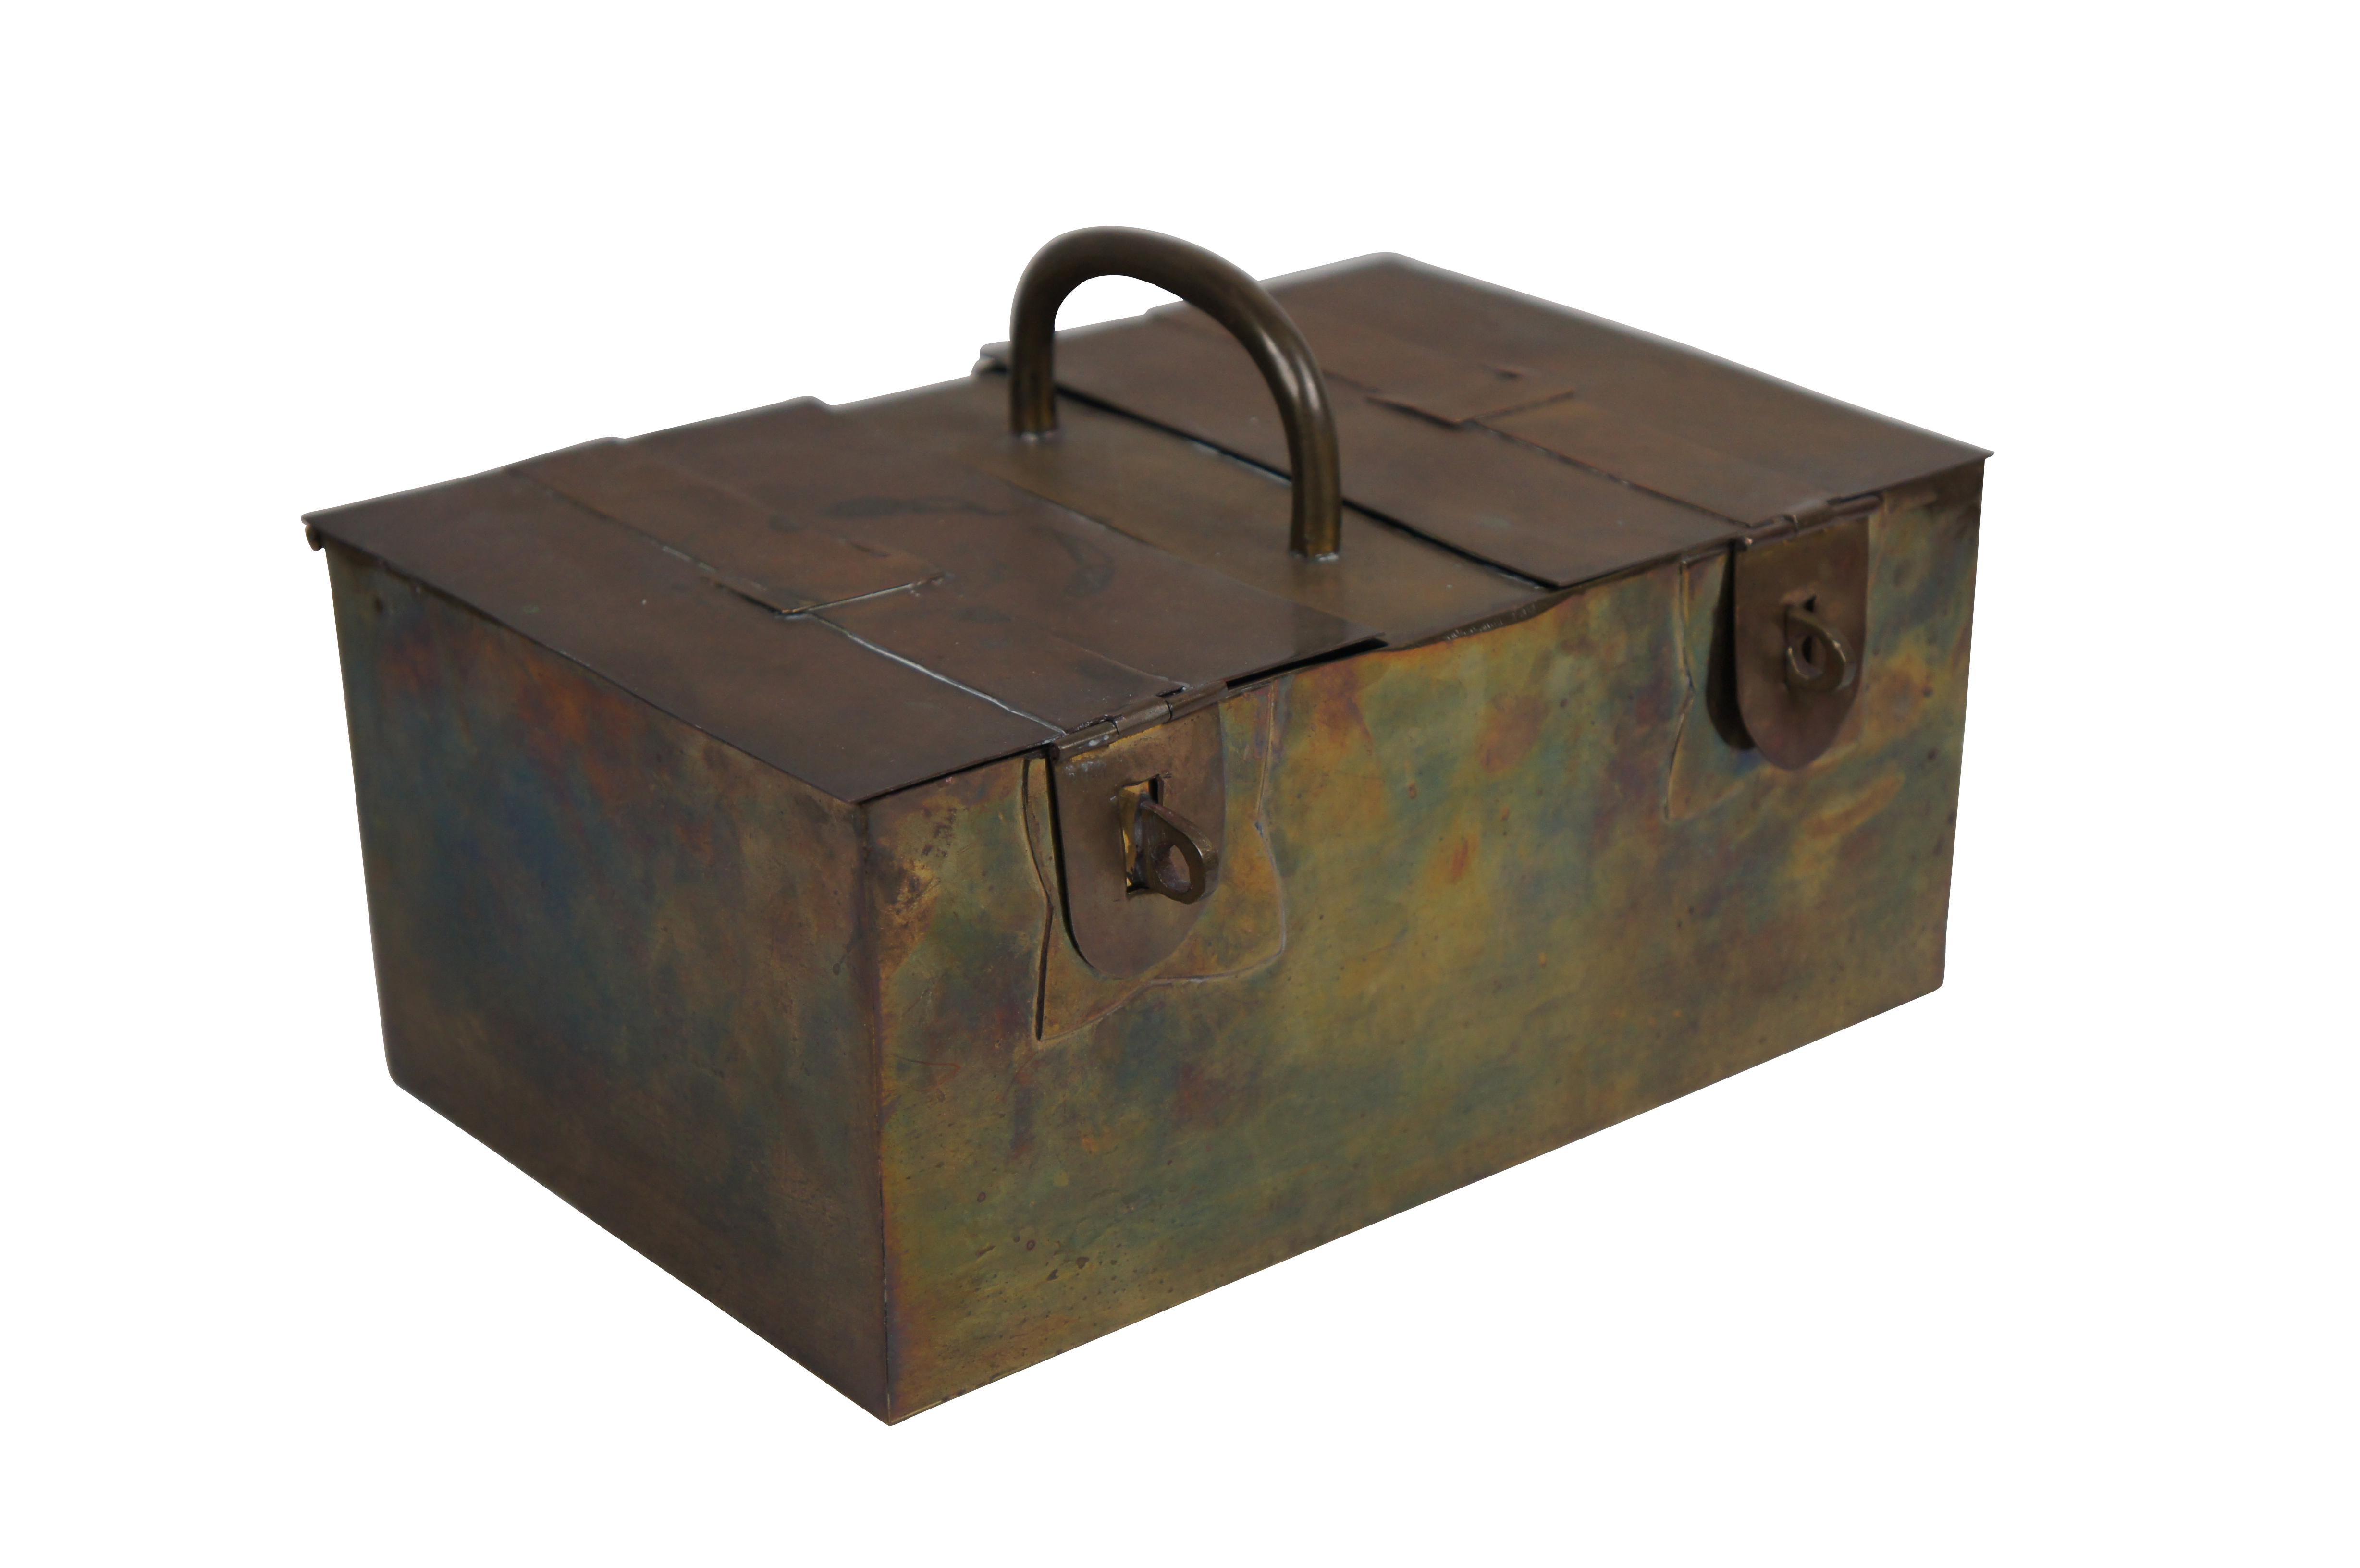 Vintage Decorative Crafts Inc hand crafted brass strong box / lock box. Rectangular form with fixed handle at center of top, two hinged lids with padlock hasps and decorative imitation straps, and single interior compartment. Made in